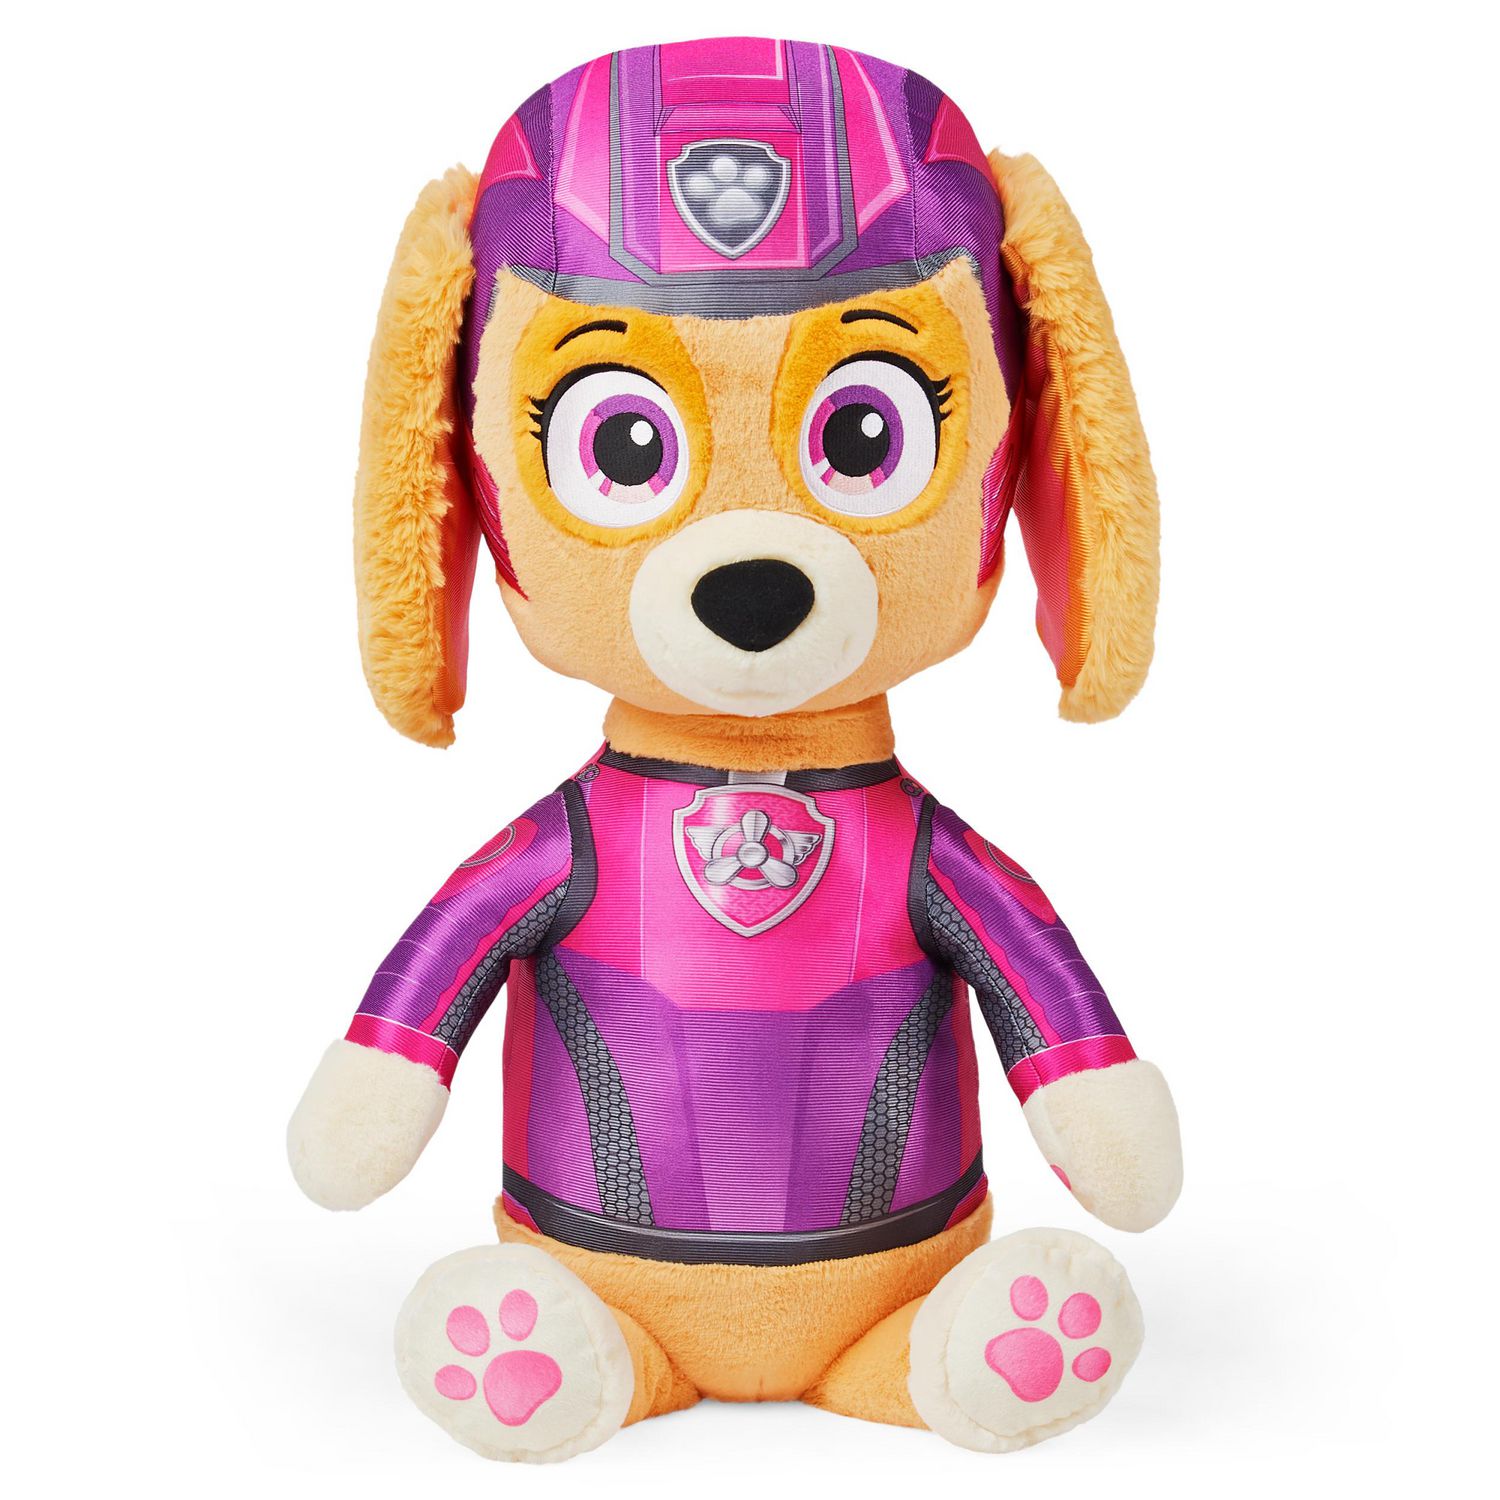 PAW Patrol, Movie Skye Jumbo Stuffed Animal Plush Toy, 29-inch, Kids Toys  for Ages 3 and up | Walmart Canada